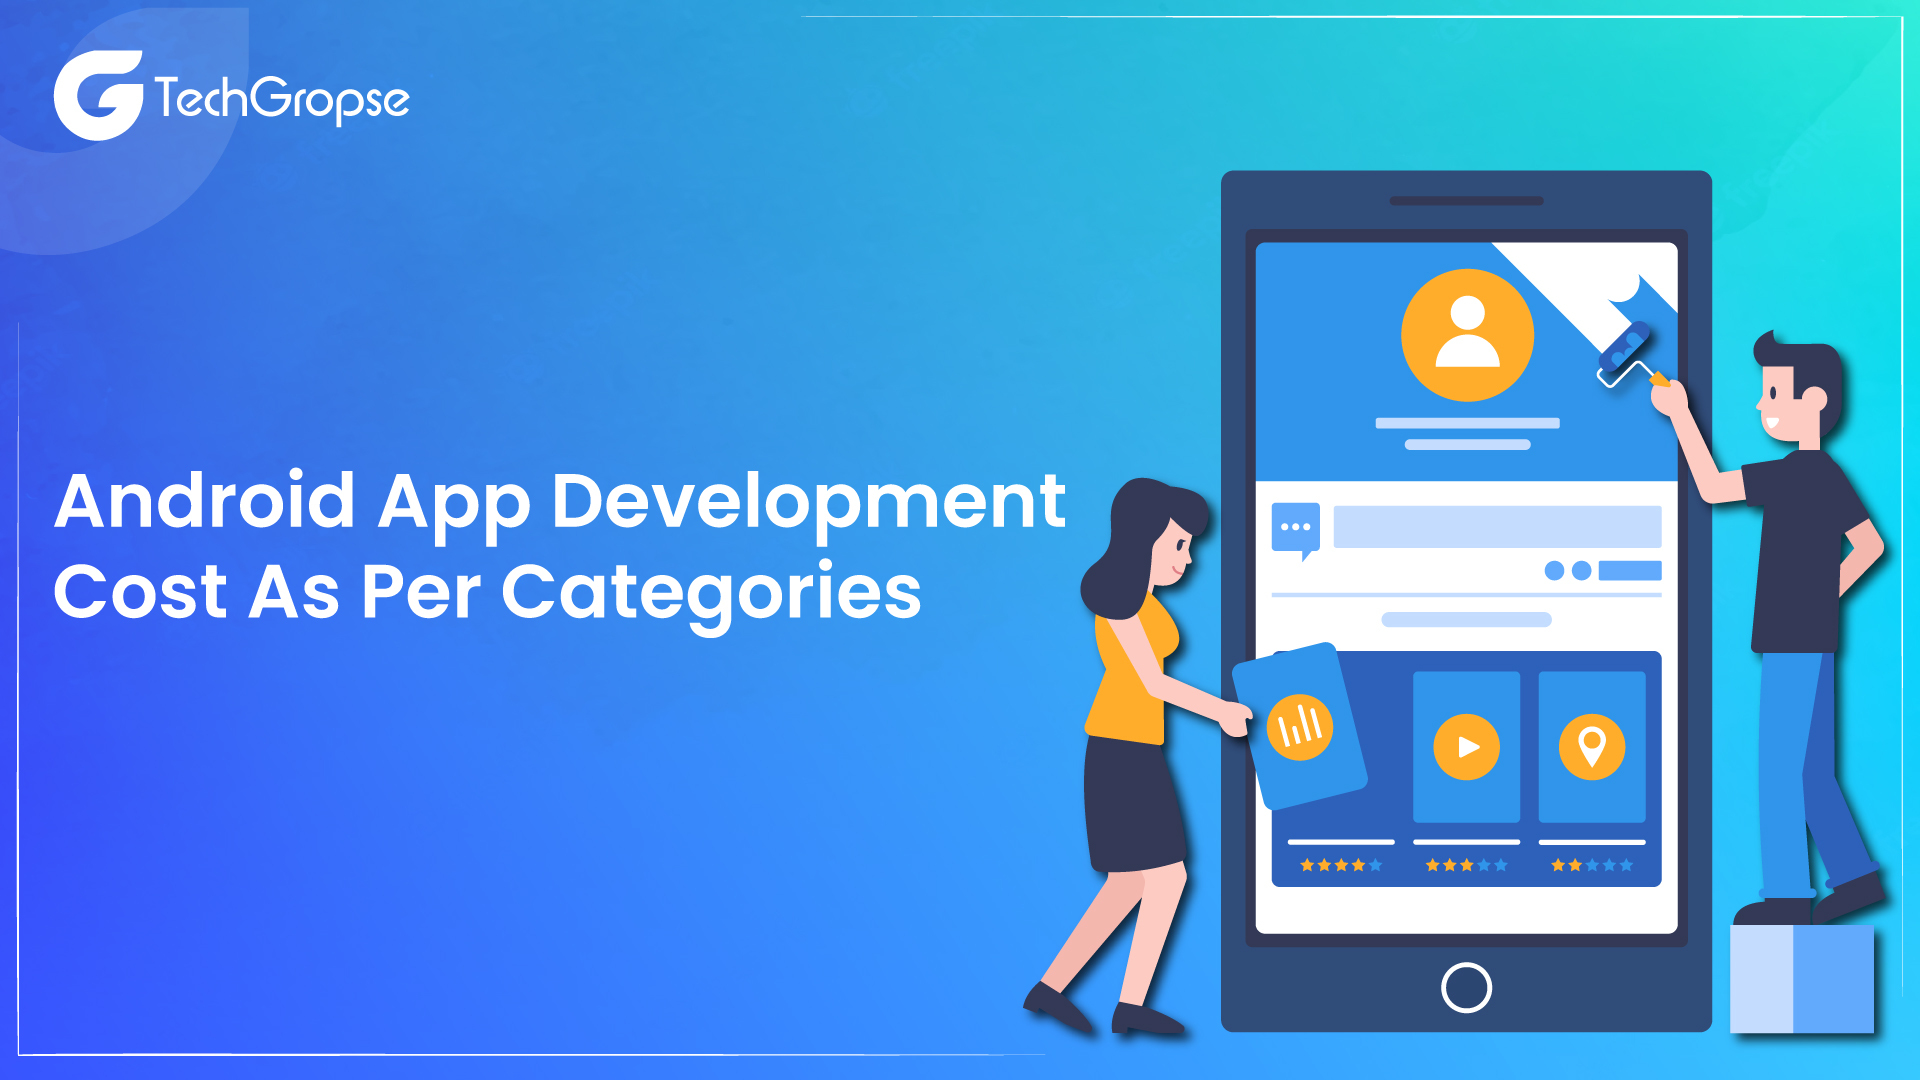 Android App Development Cost As Per Categories